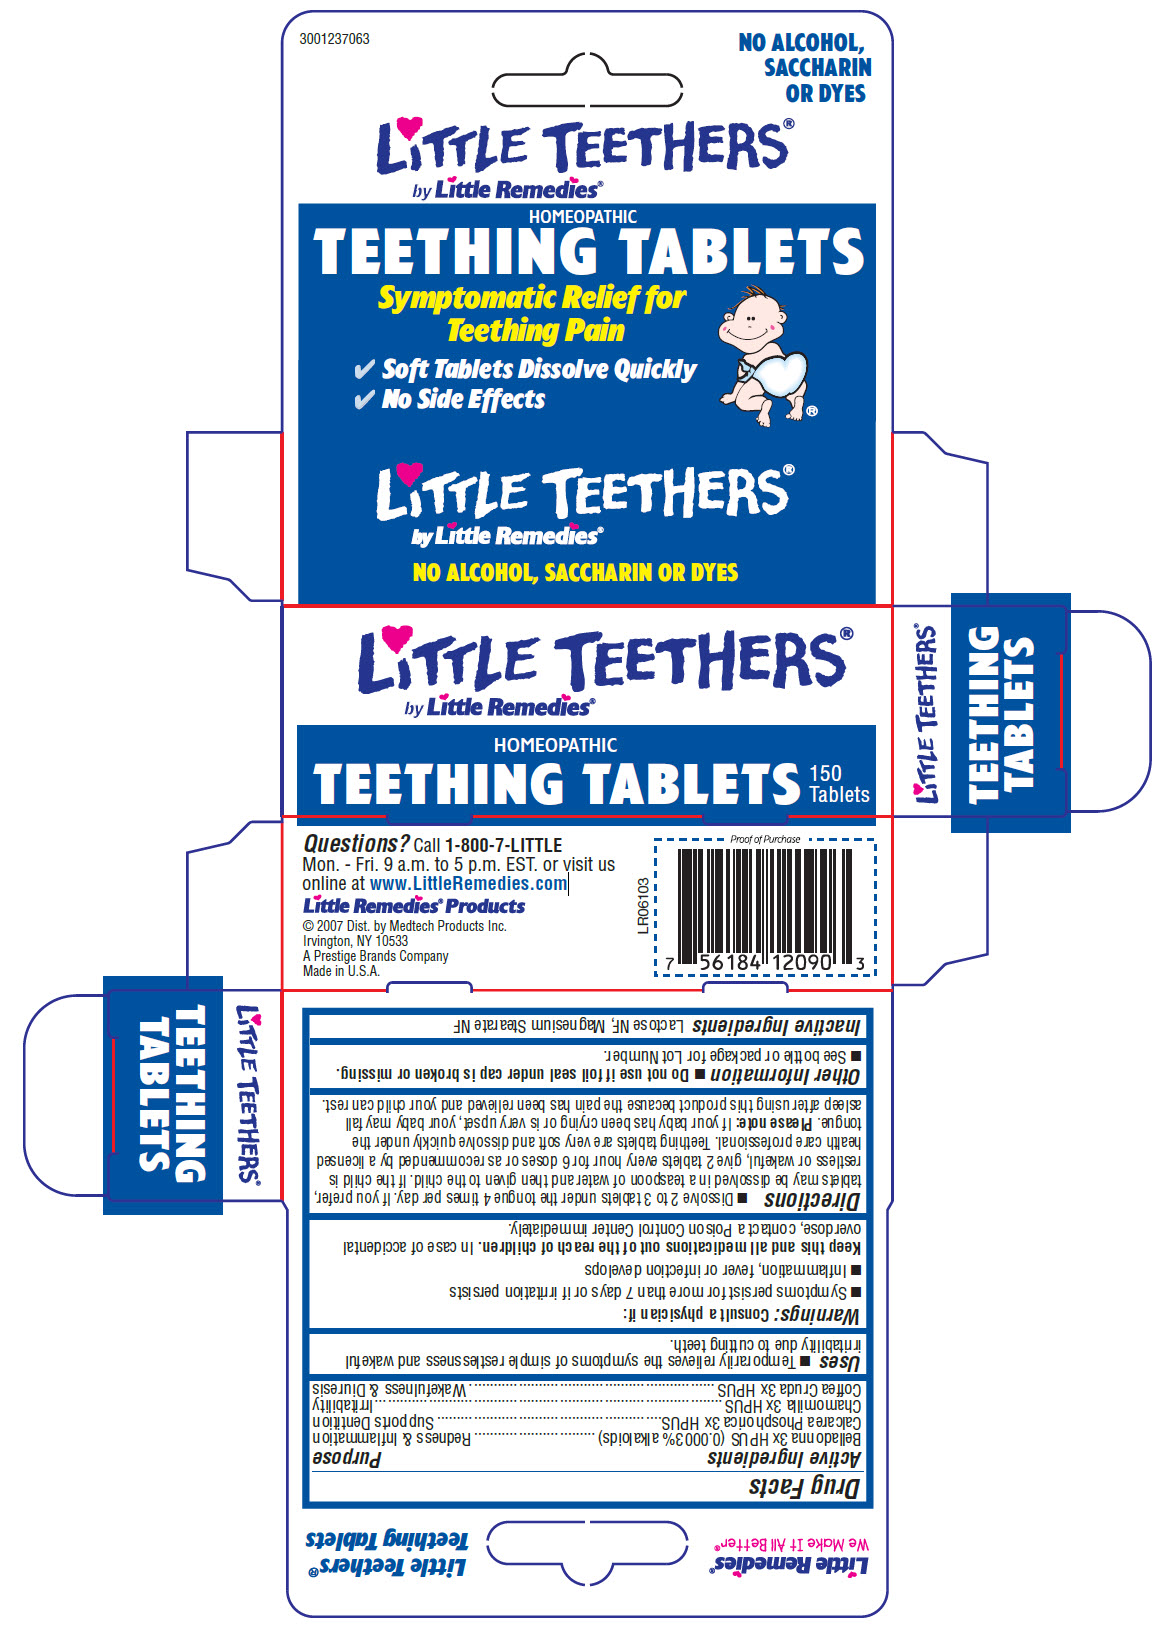 Little Teethers by Little Remedies Homeopathic Teething Tablets Symptomatic Relief for Teething Pain 150 Tablets